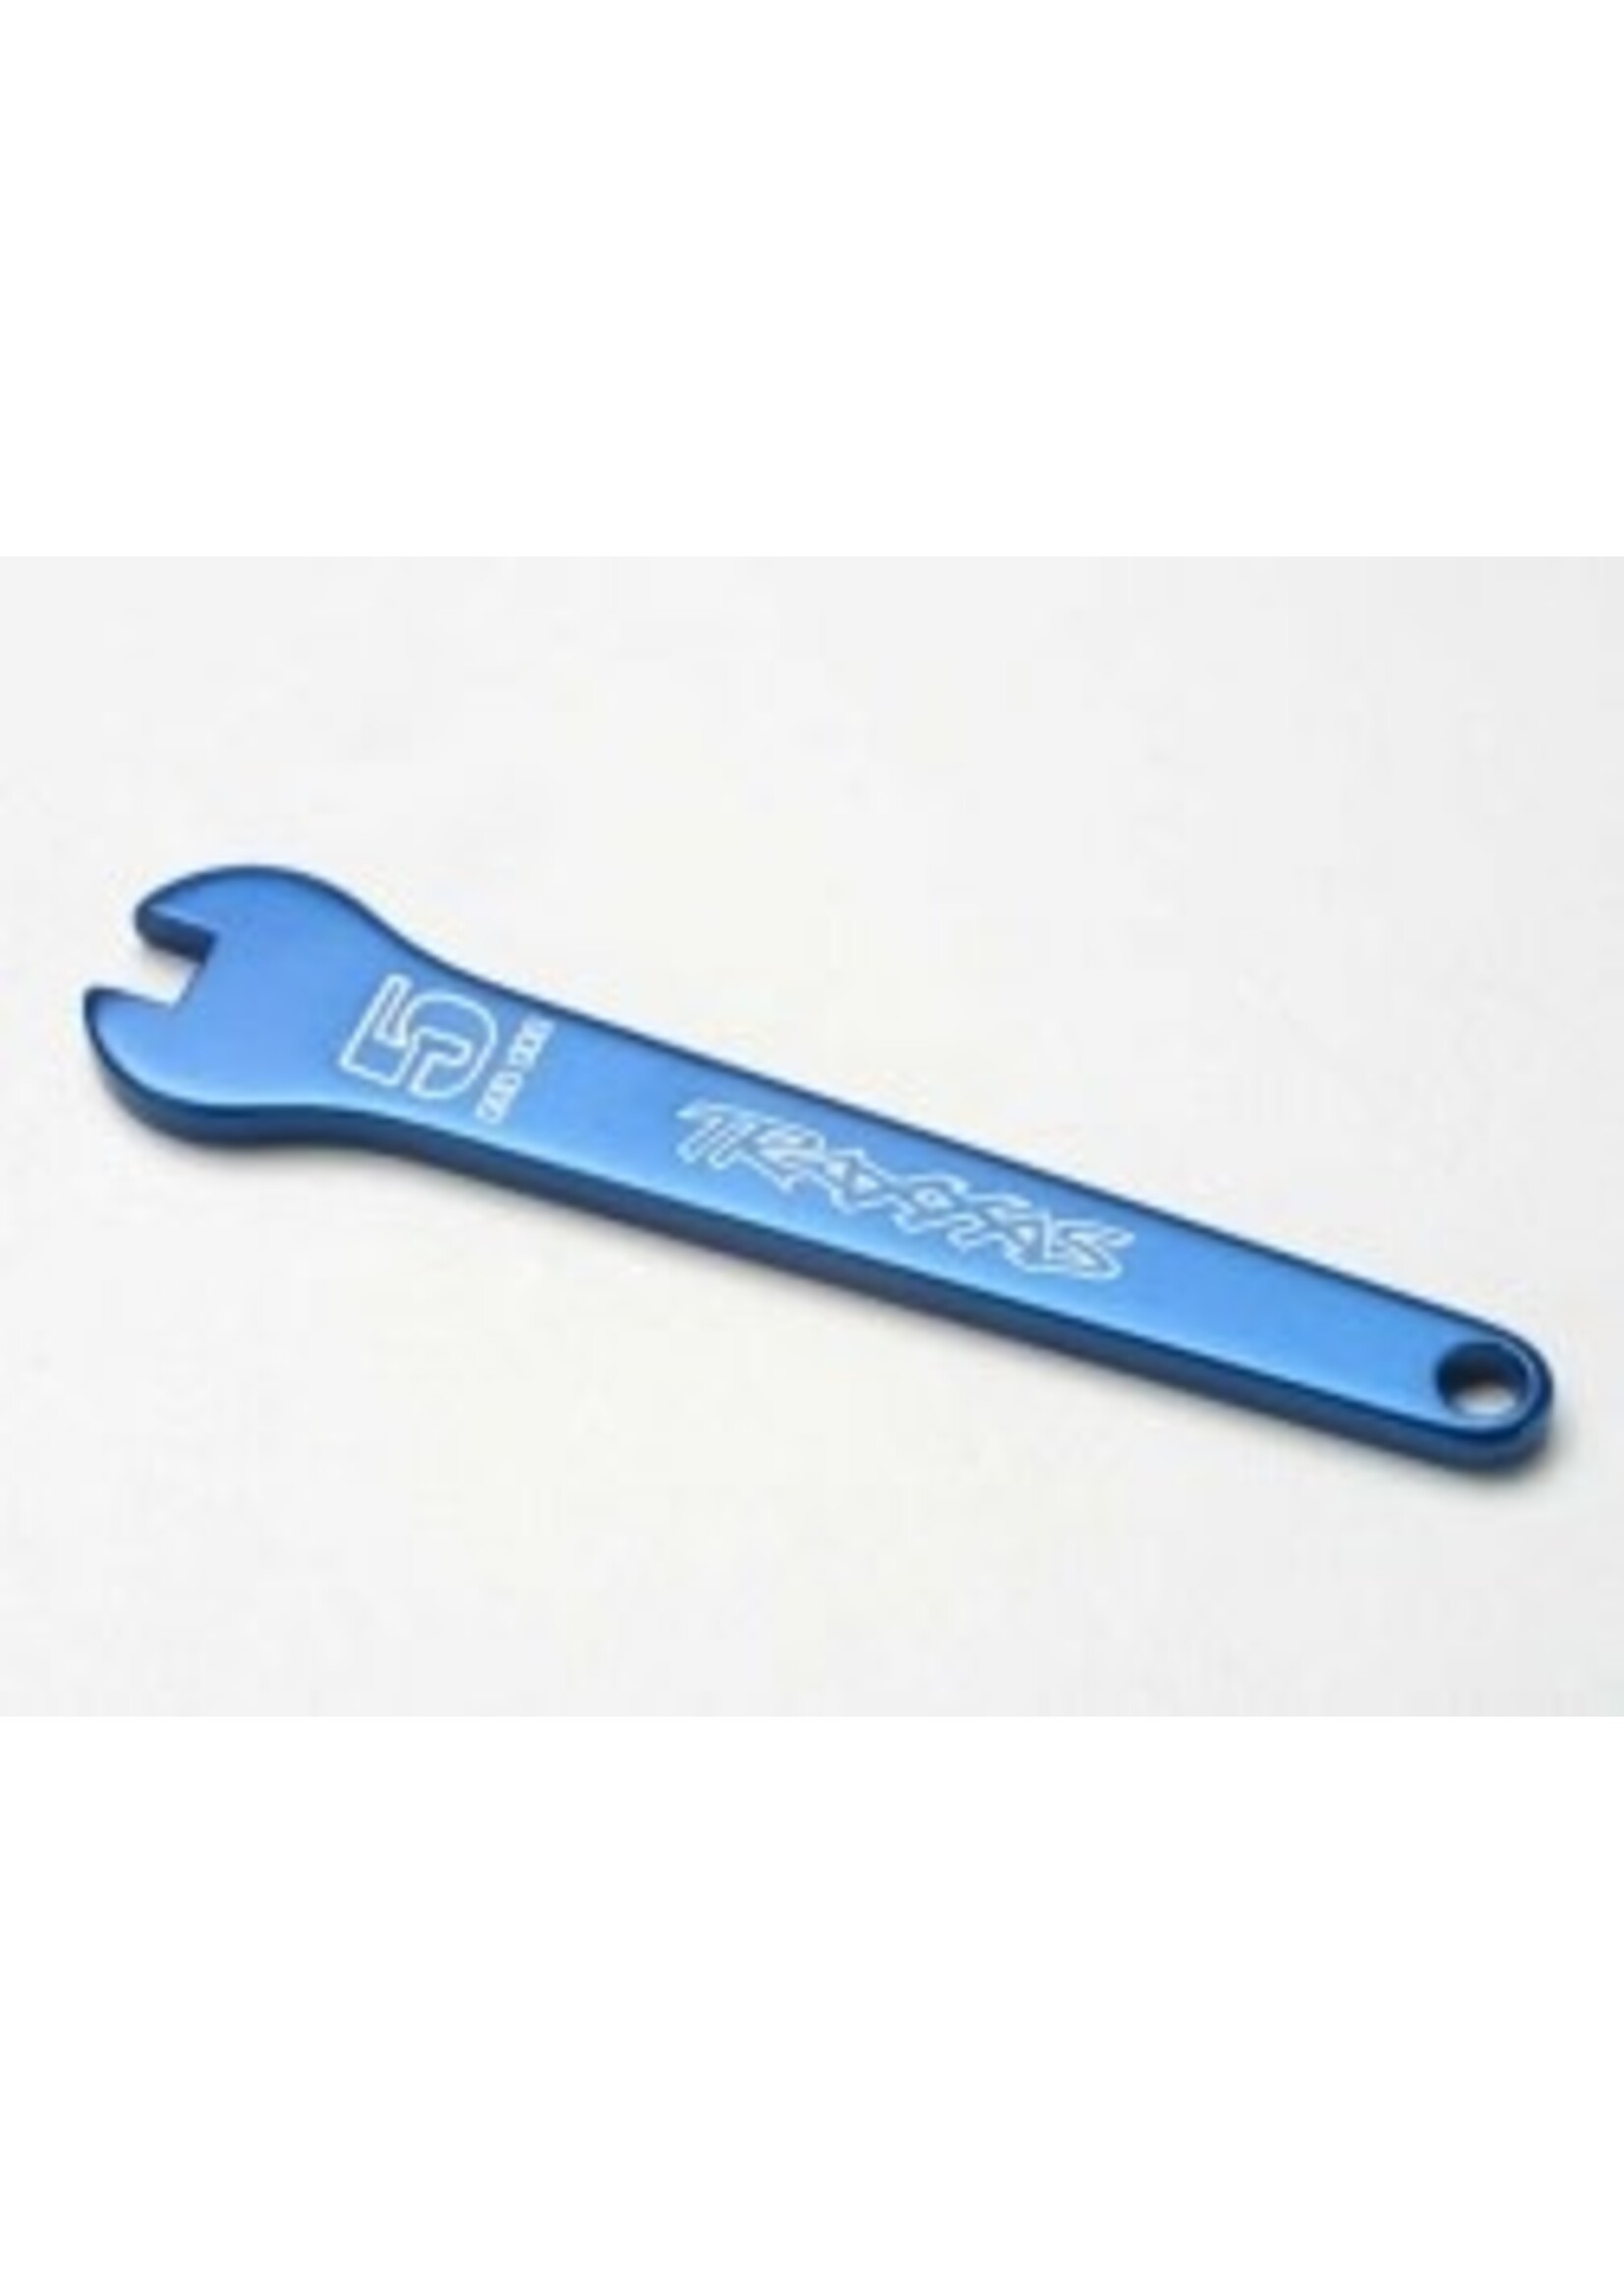 Traxxas 5477 Flat wrench, 5mm (blue anodized aluminum)